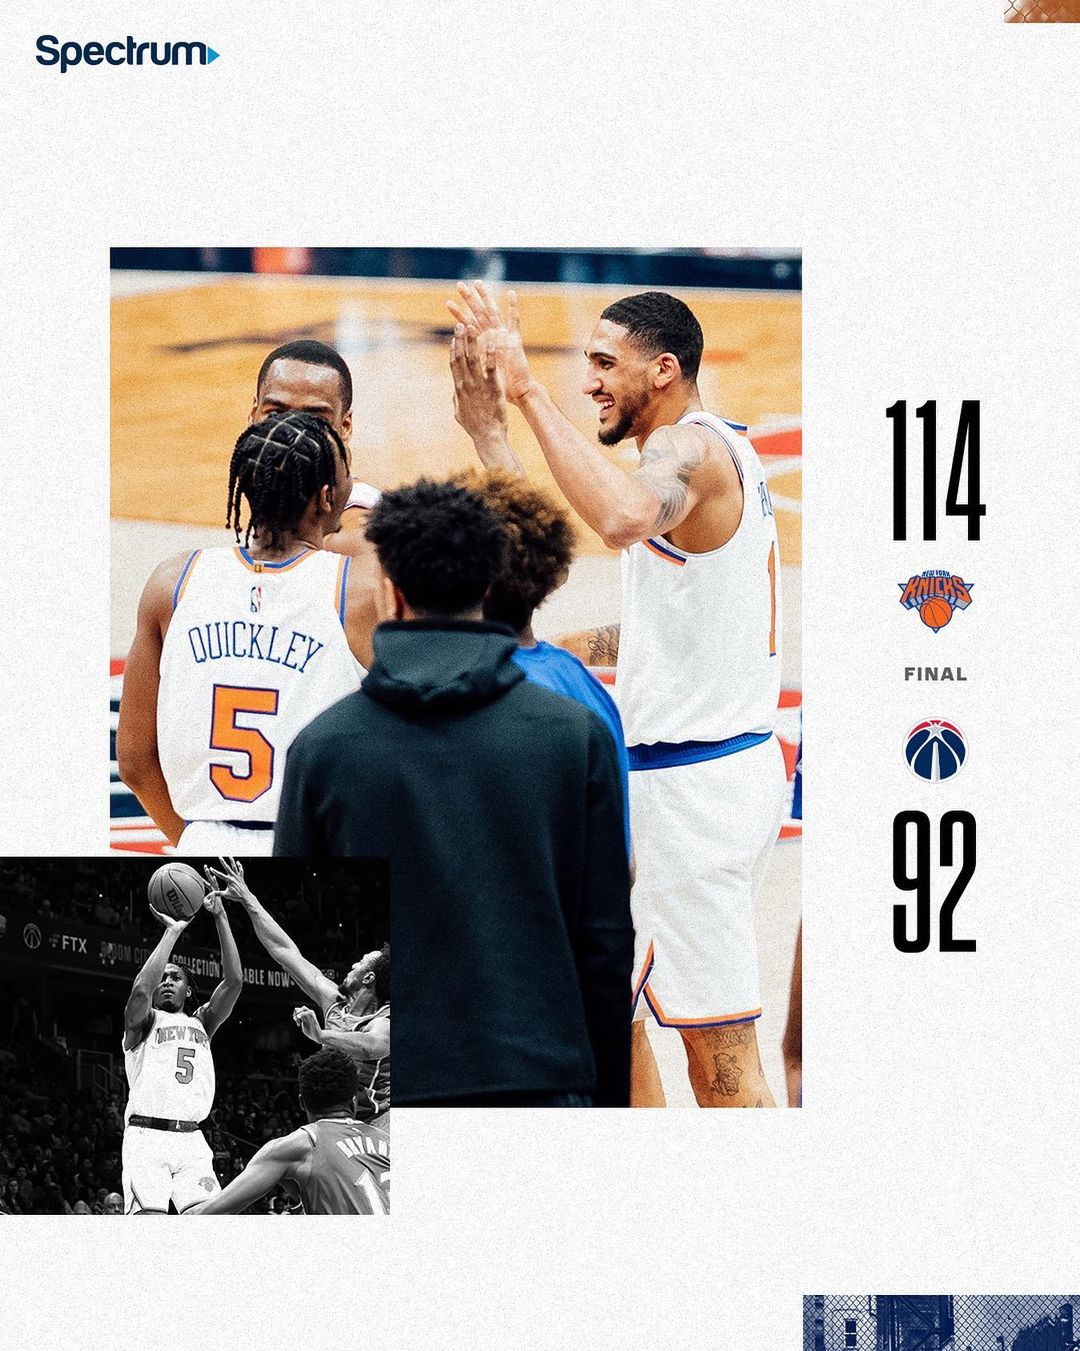 Getting it done on the road. #NewYorkForever...